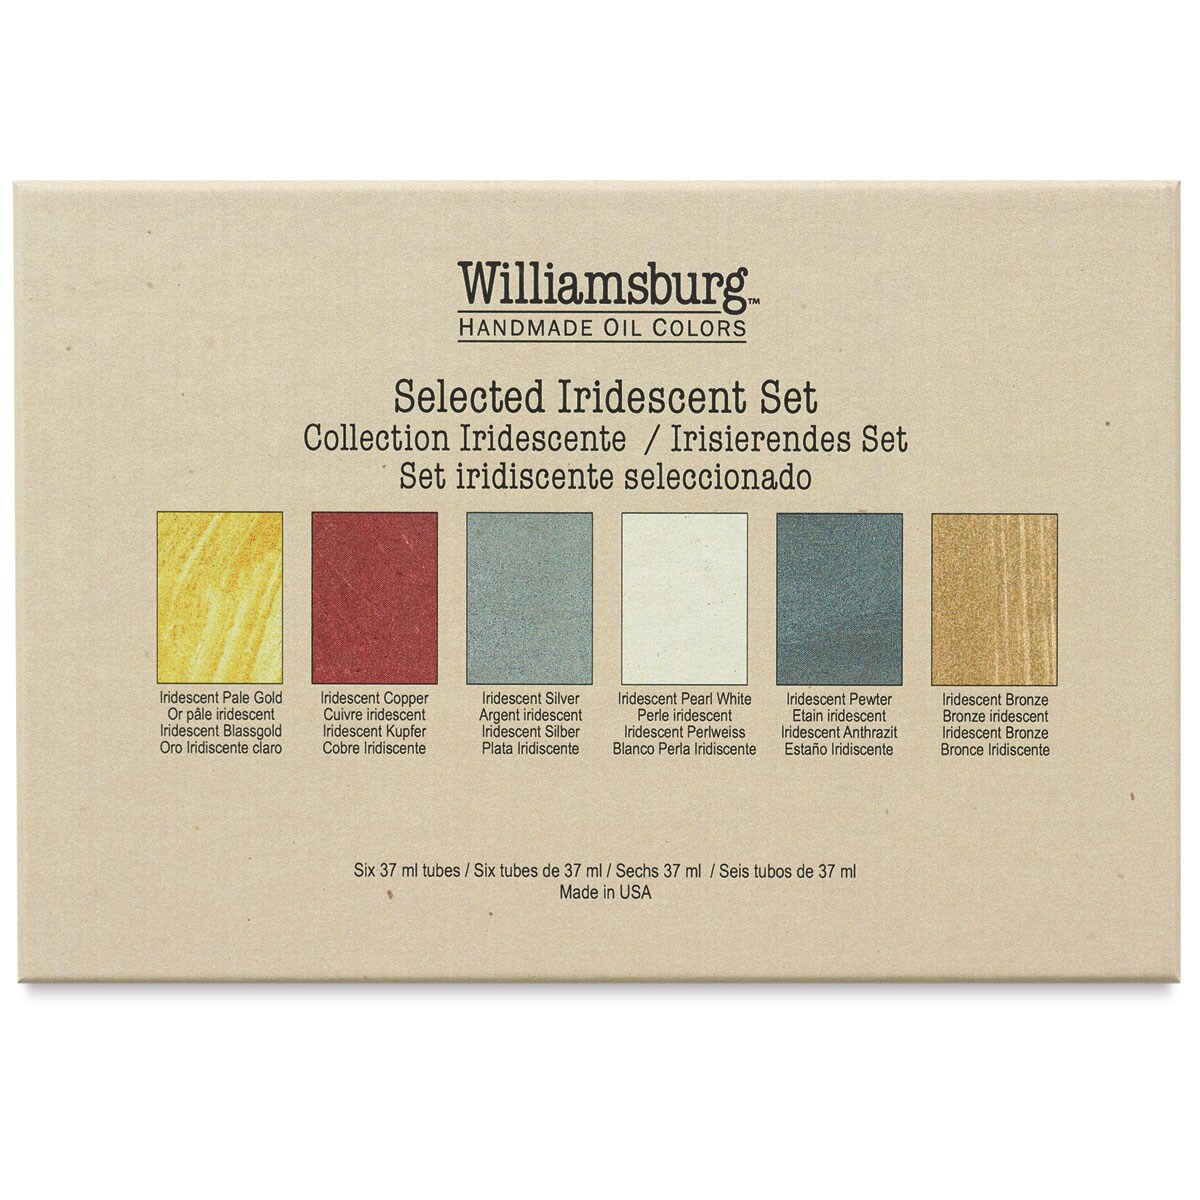 Williamsburg Handmade Oil Paints - Selected Iridescents Set, Set of 6 colors, 40 ml tubes